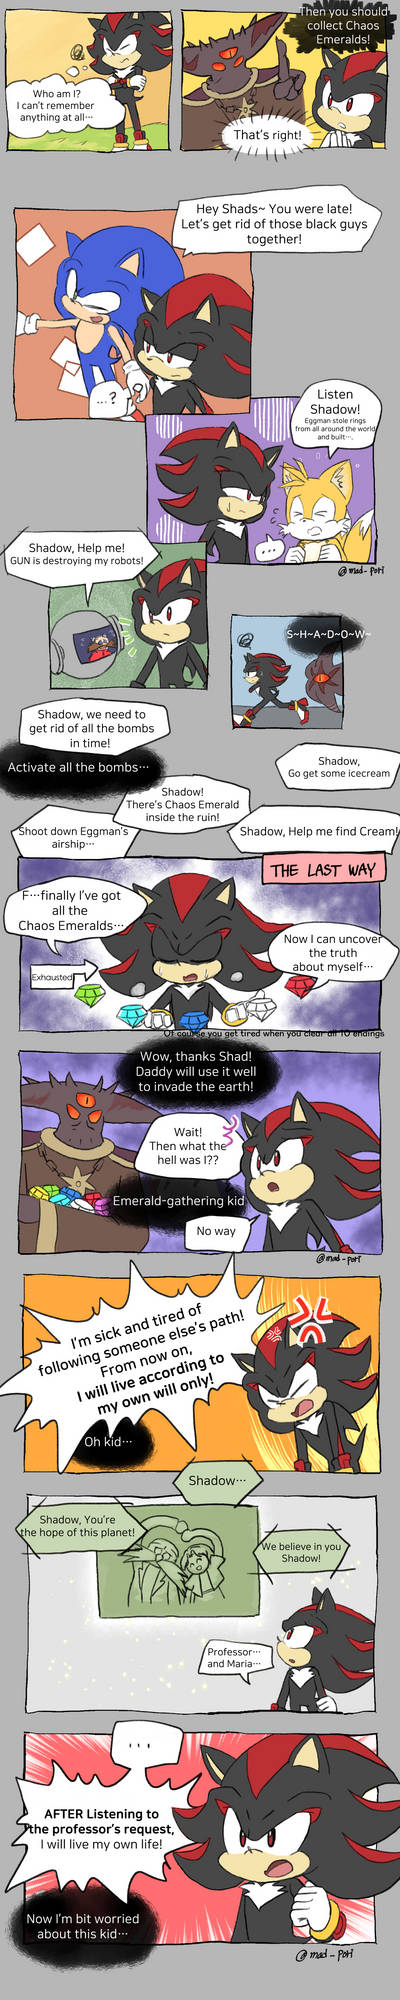 So This is Basically SHADOW THE HEDGEHOG